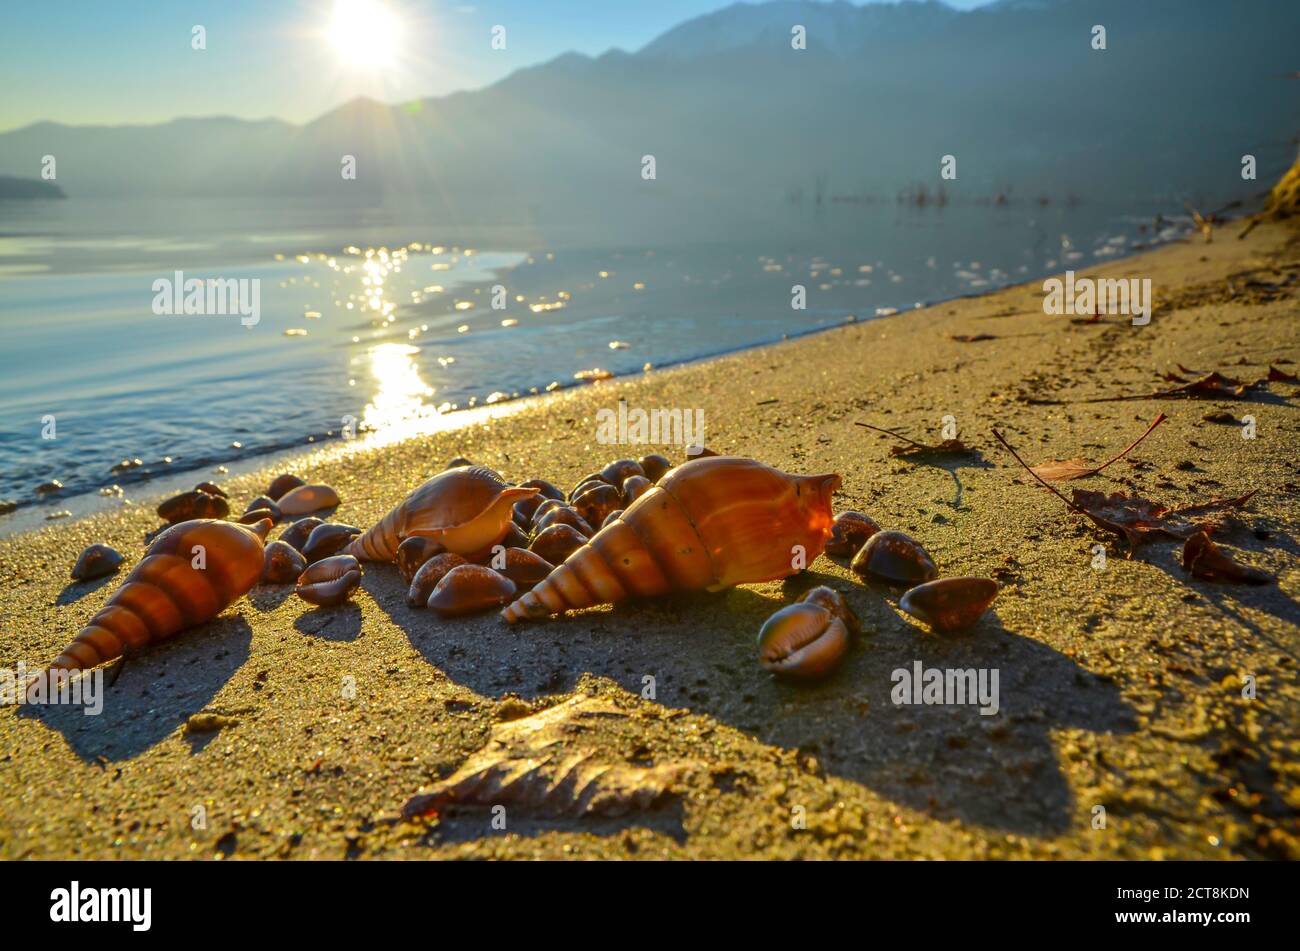 Shells on the Sand Beach with Mountain in Sunset in Ascona, Switzerland. Stock Photo